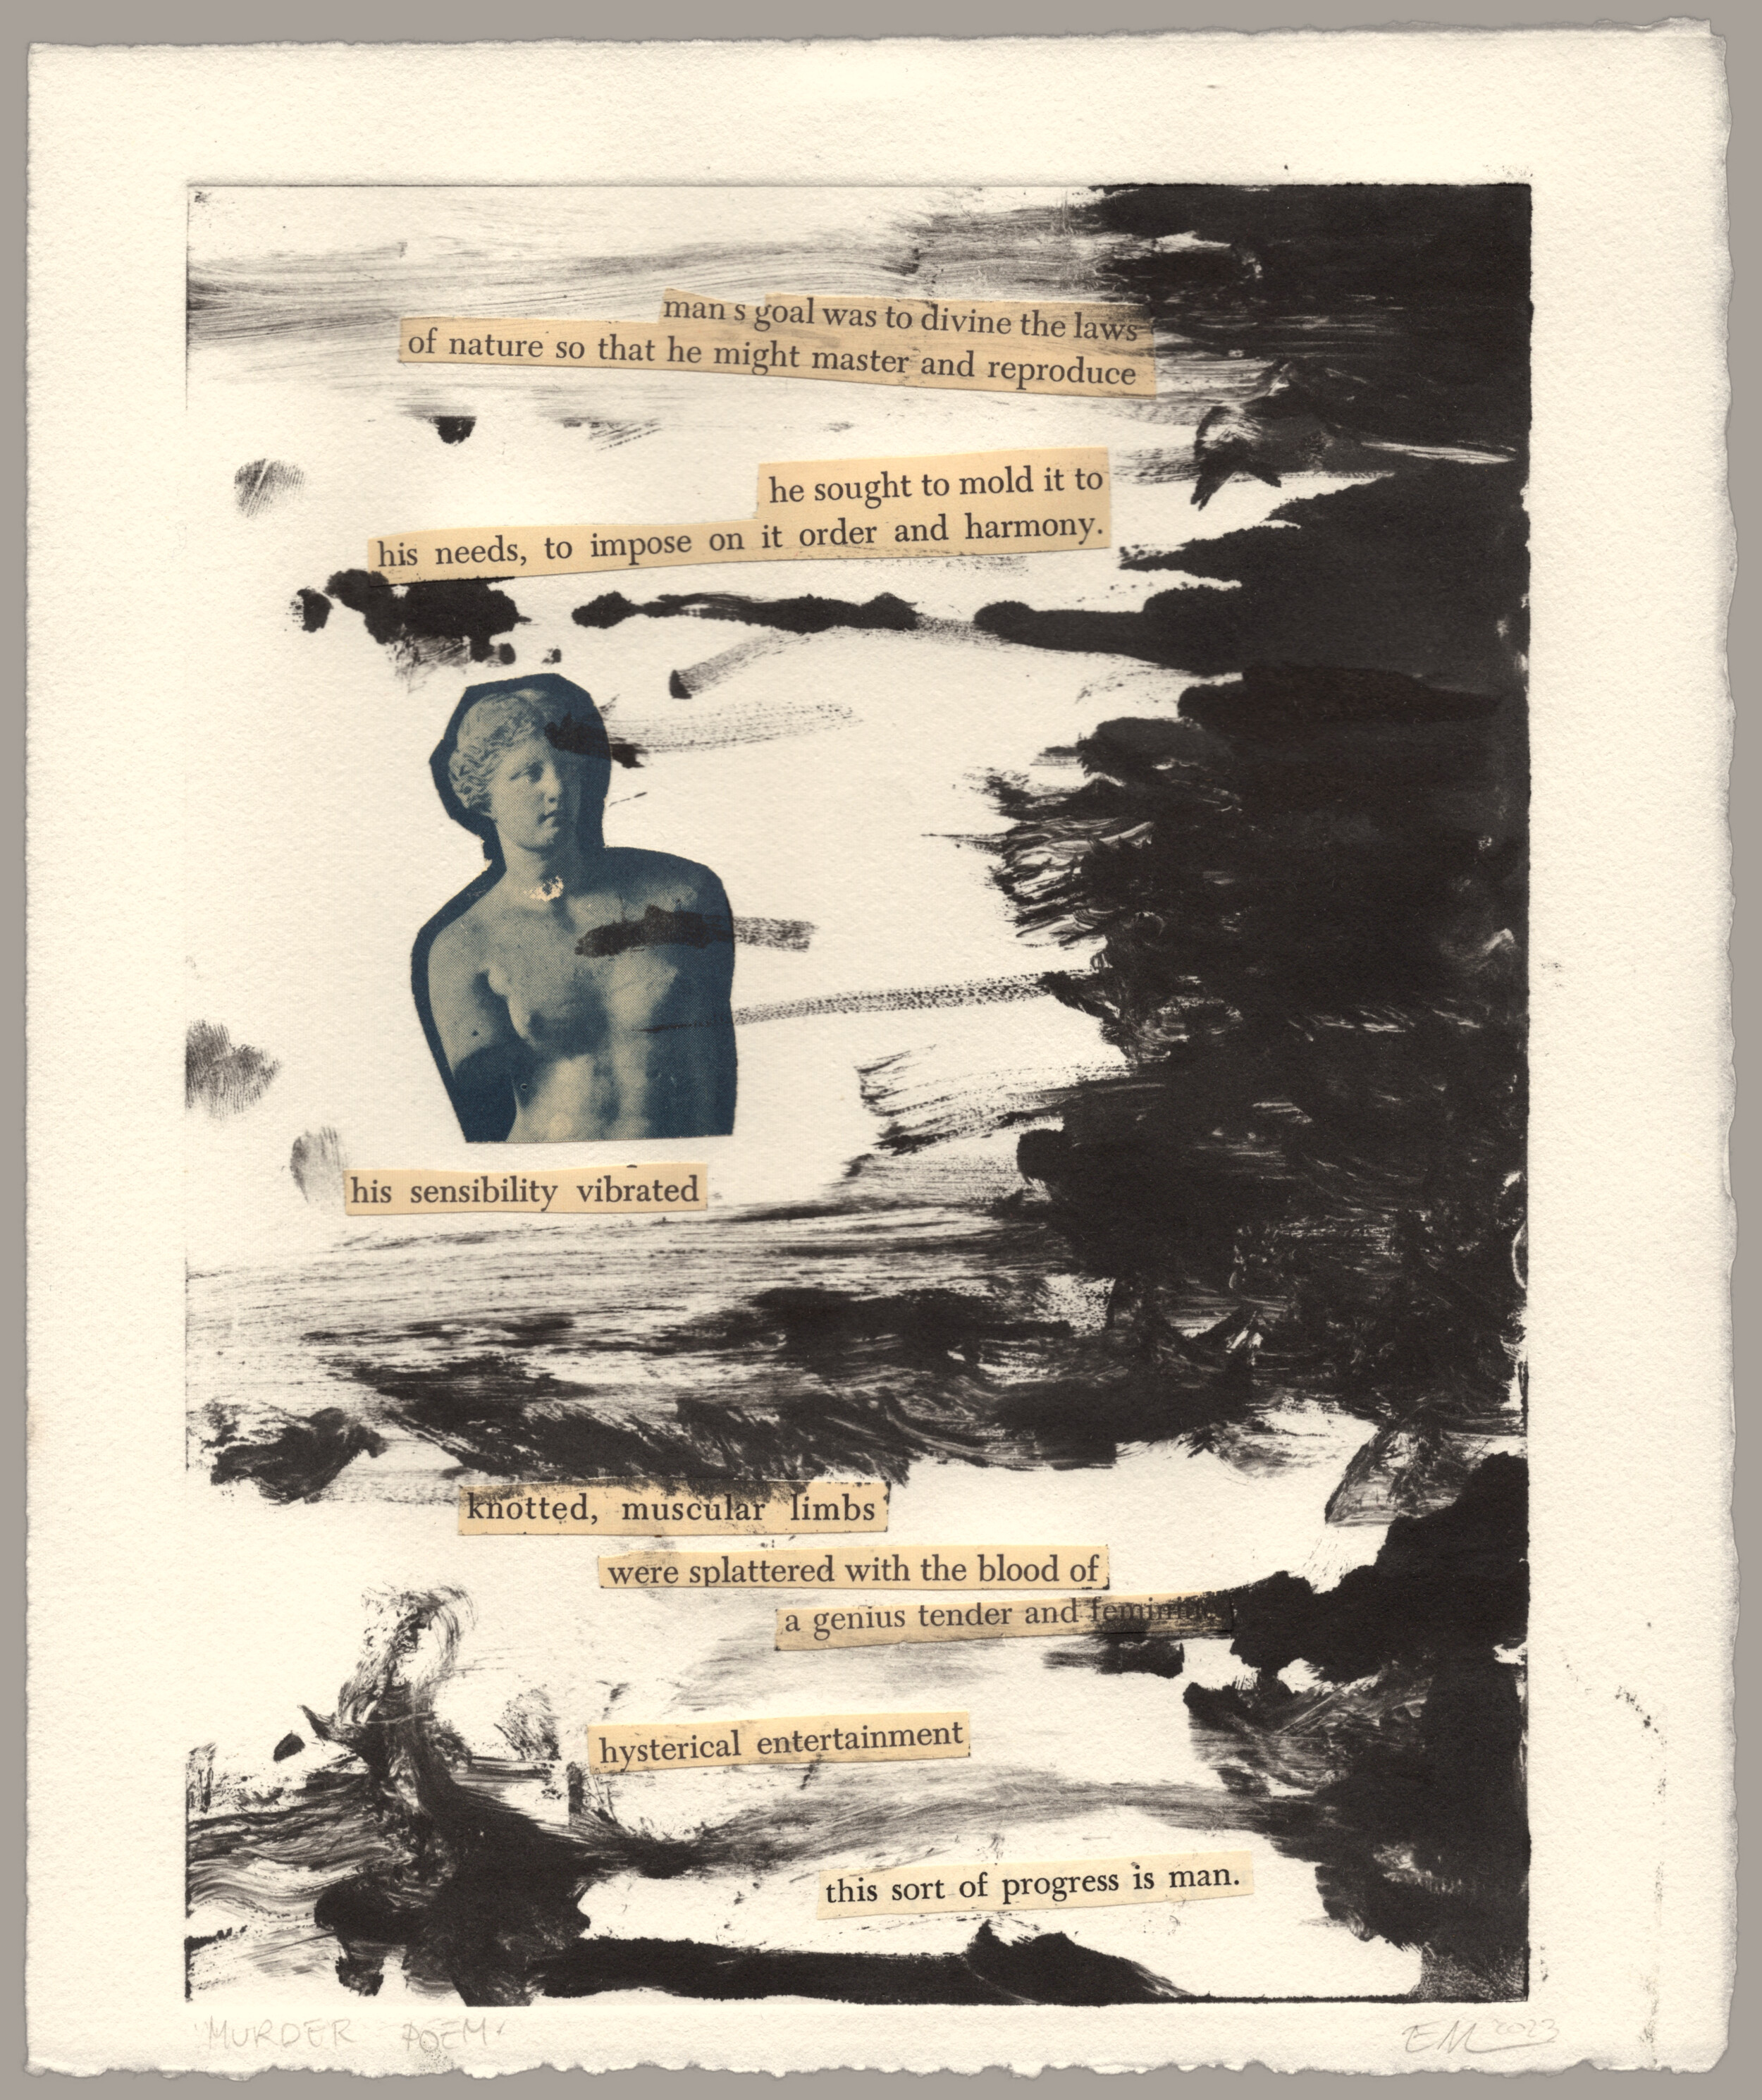 Paper cuttings pasted onto warm white paper. In the center is an image of a greco-roman statue from the waist up, and around it is pieces of text which read: 'man's goal was to divine the laws of nature so that he might master and reproduce; he sought to mold it to his needs, to impose on it order and harmony; his sensibility vibrated; knotted, muscular limbs; were splattered with the blood of; a genius tender and feminine; hysterical entertainment; this sort of progress is man.' Coming from the right side of the image is swirls of black paint like clouds, covering the text slightly in some places. The print is signed: 'Murder Poem, EM 2023'